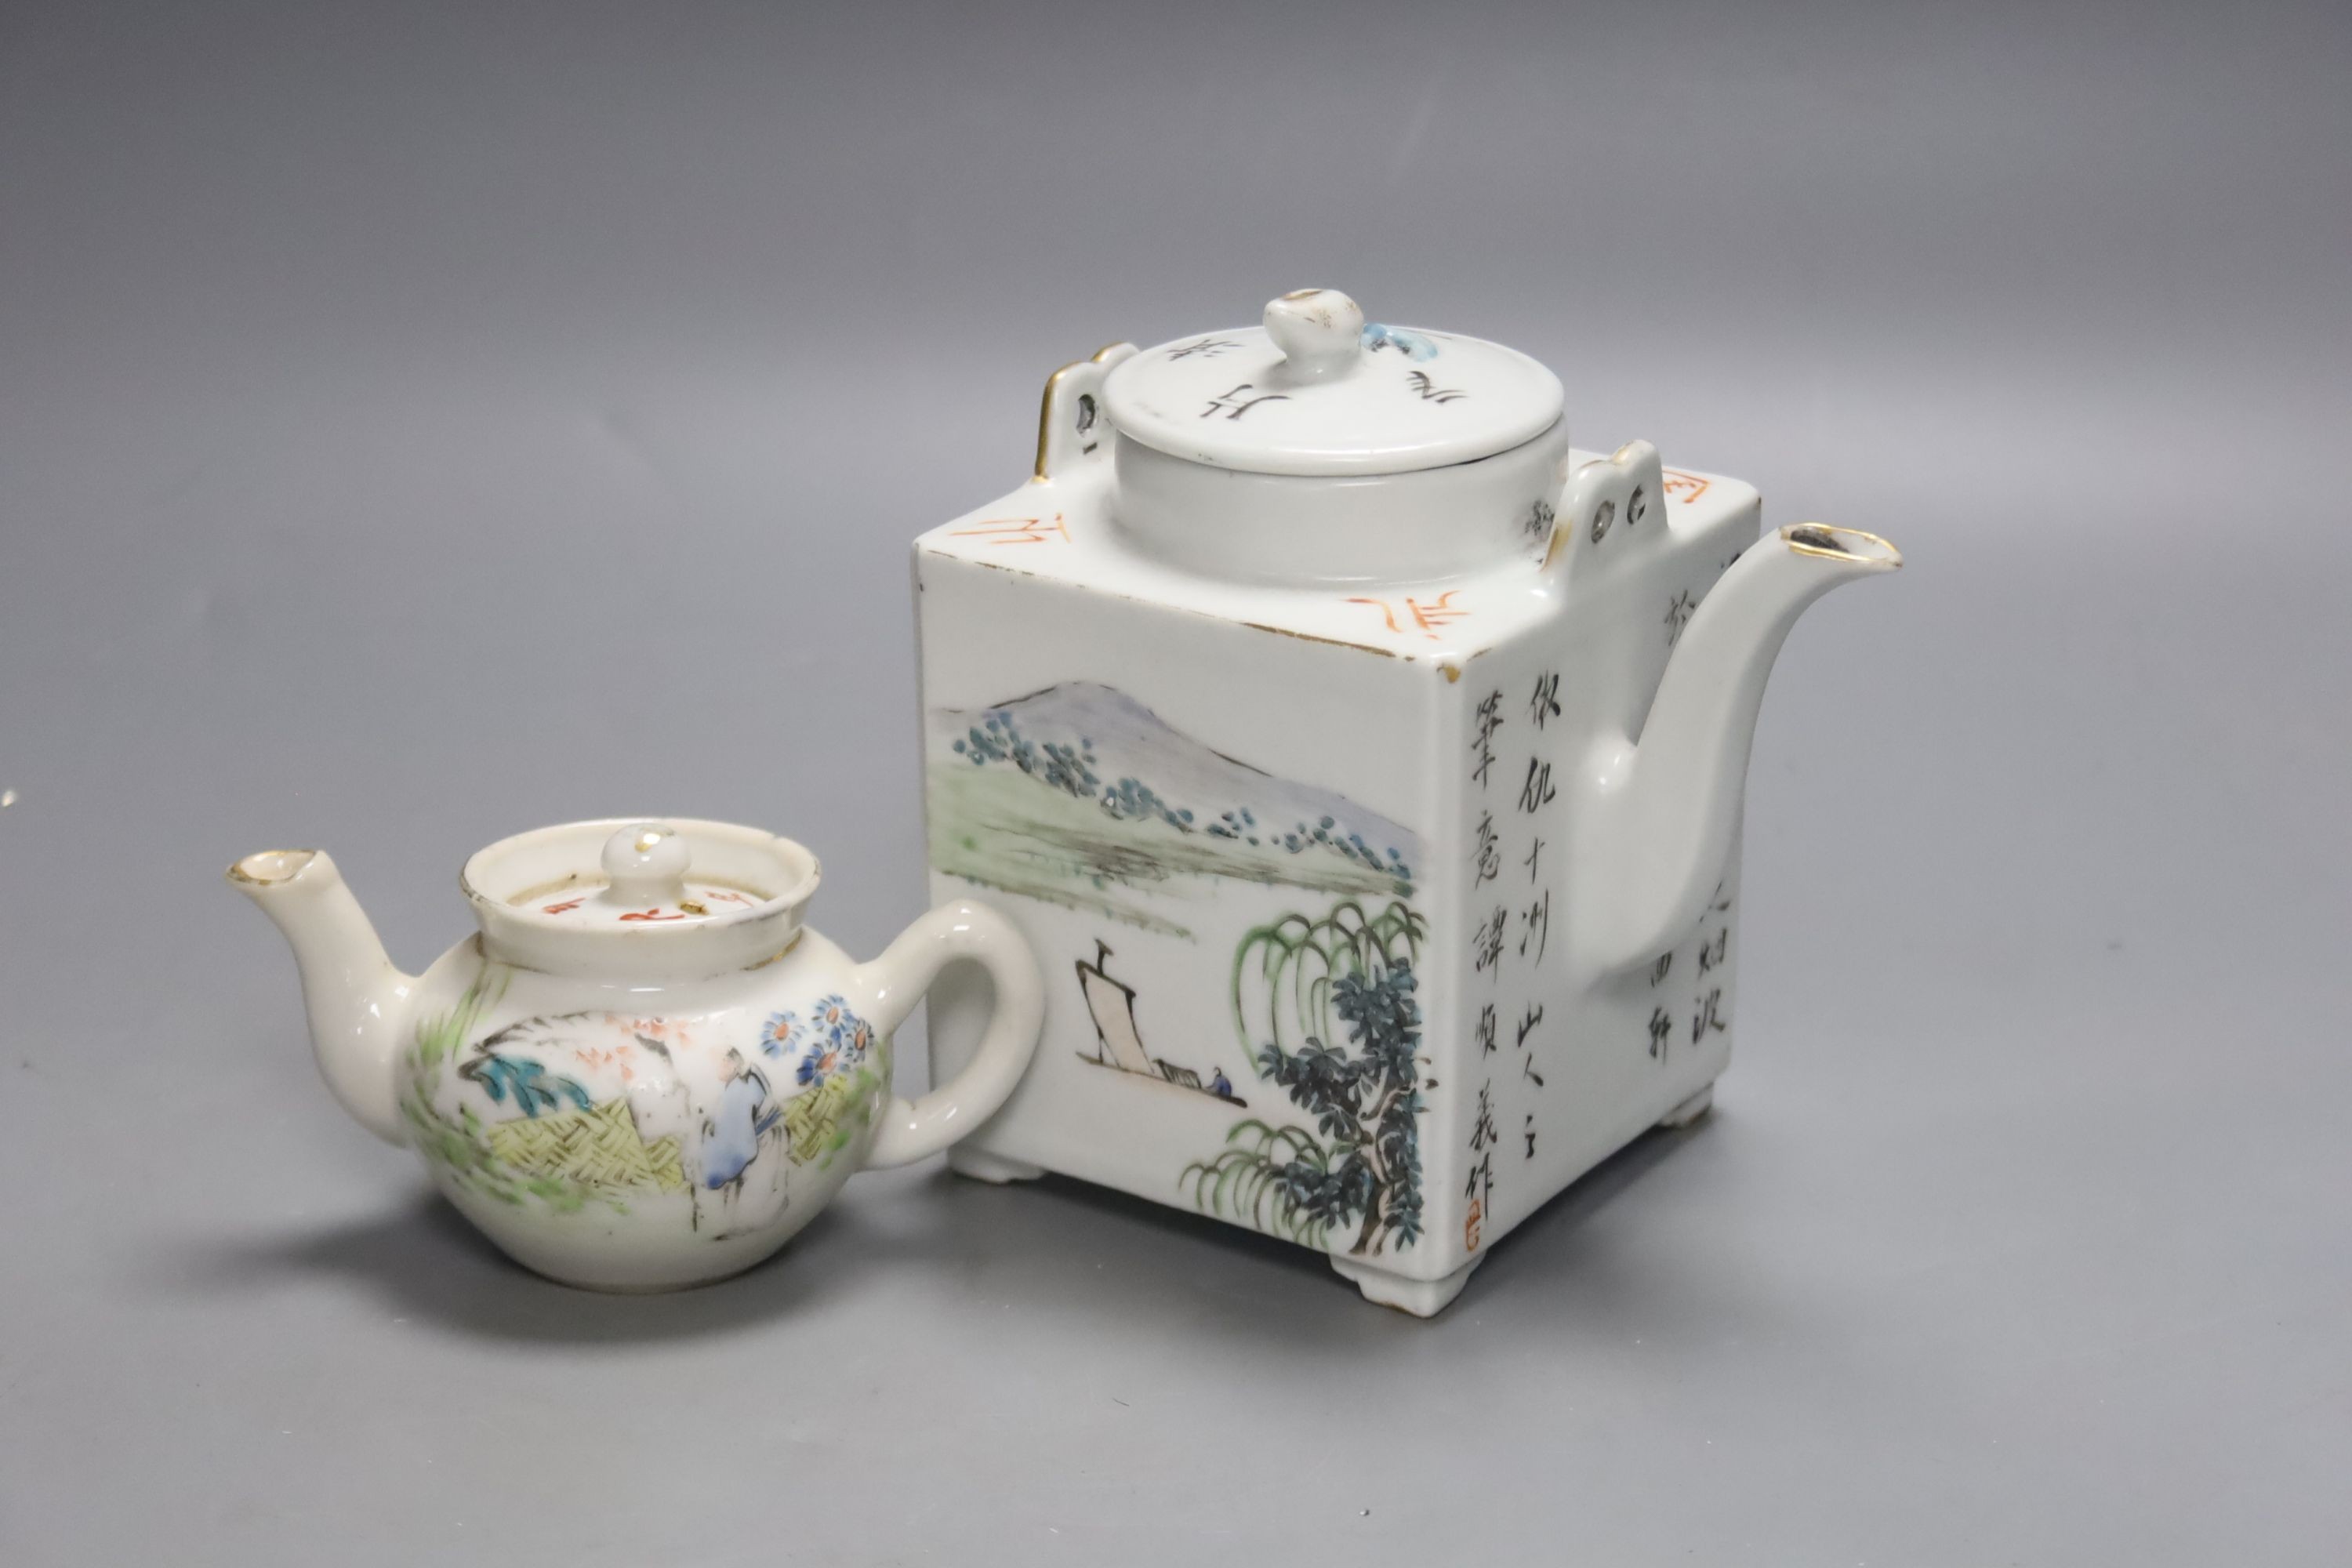 A Chinese enamelled porcelain square teapot and cover and a similar miniature teapot and cover, tallest 13cm